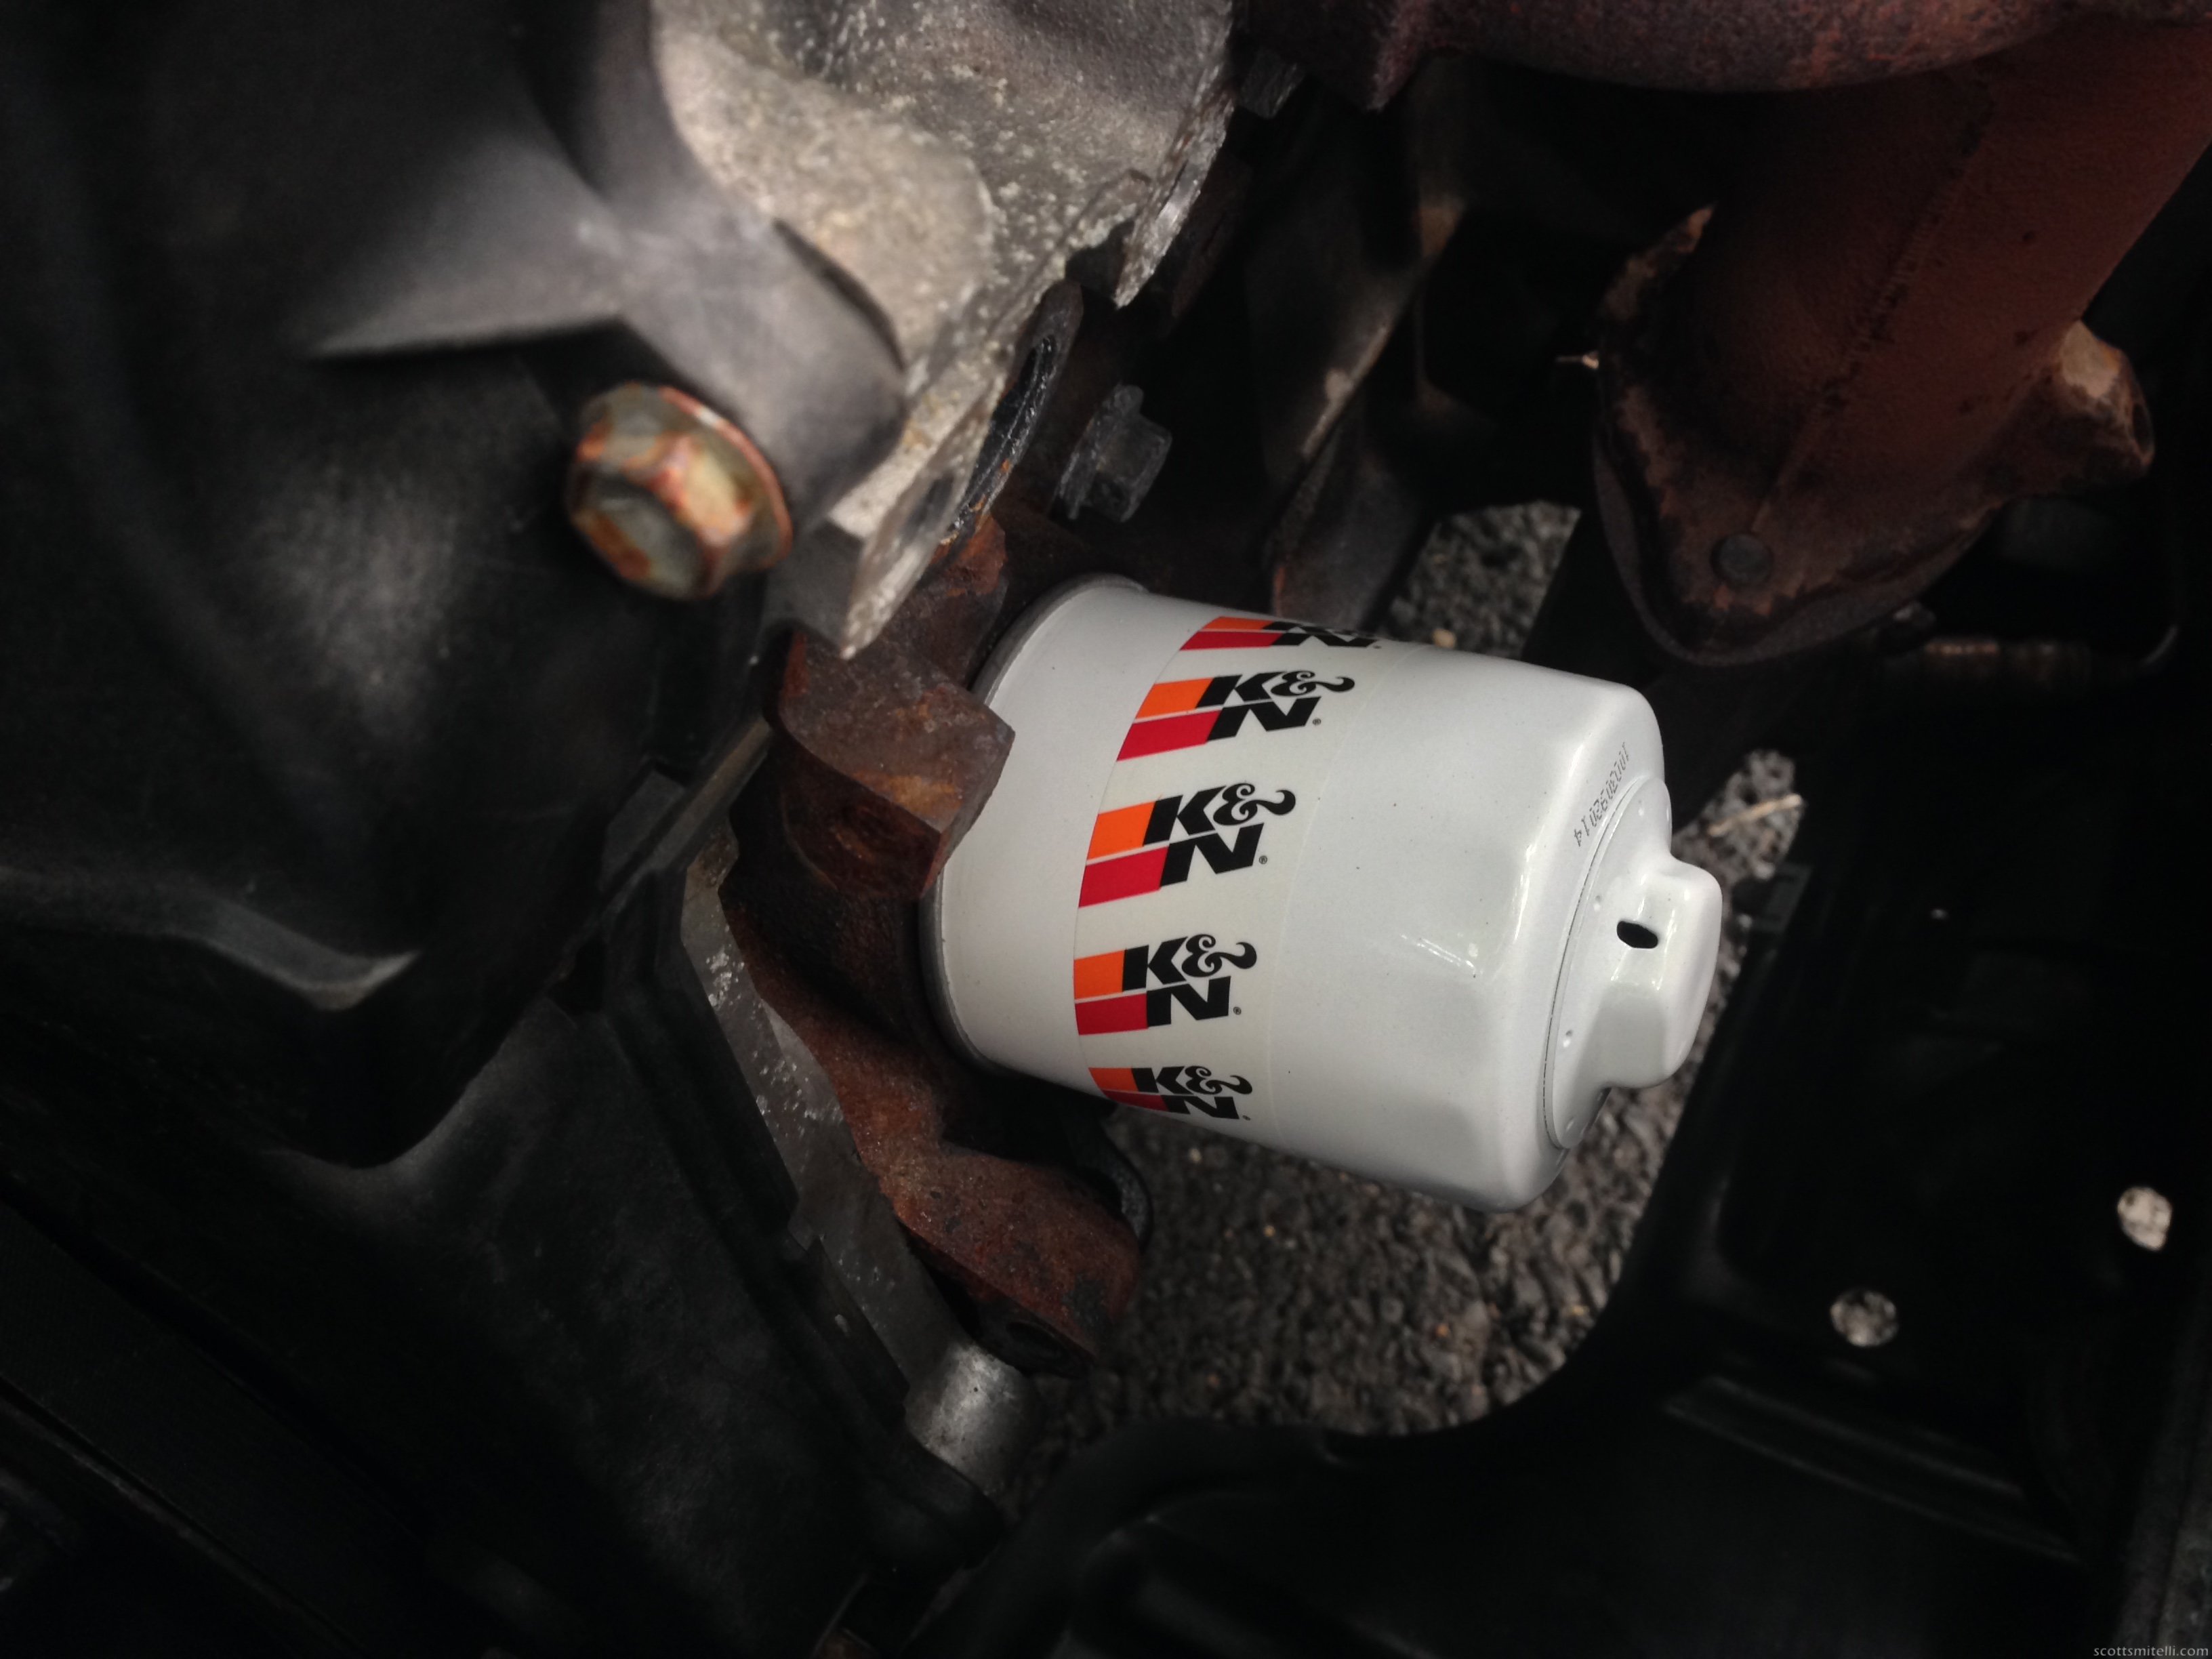 Somebody bought a twelve dollar oil filter...